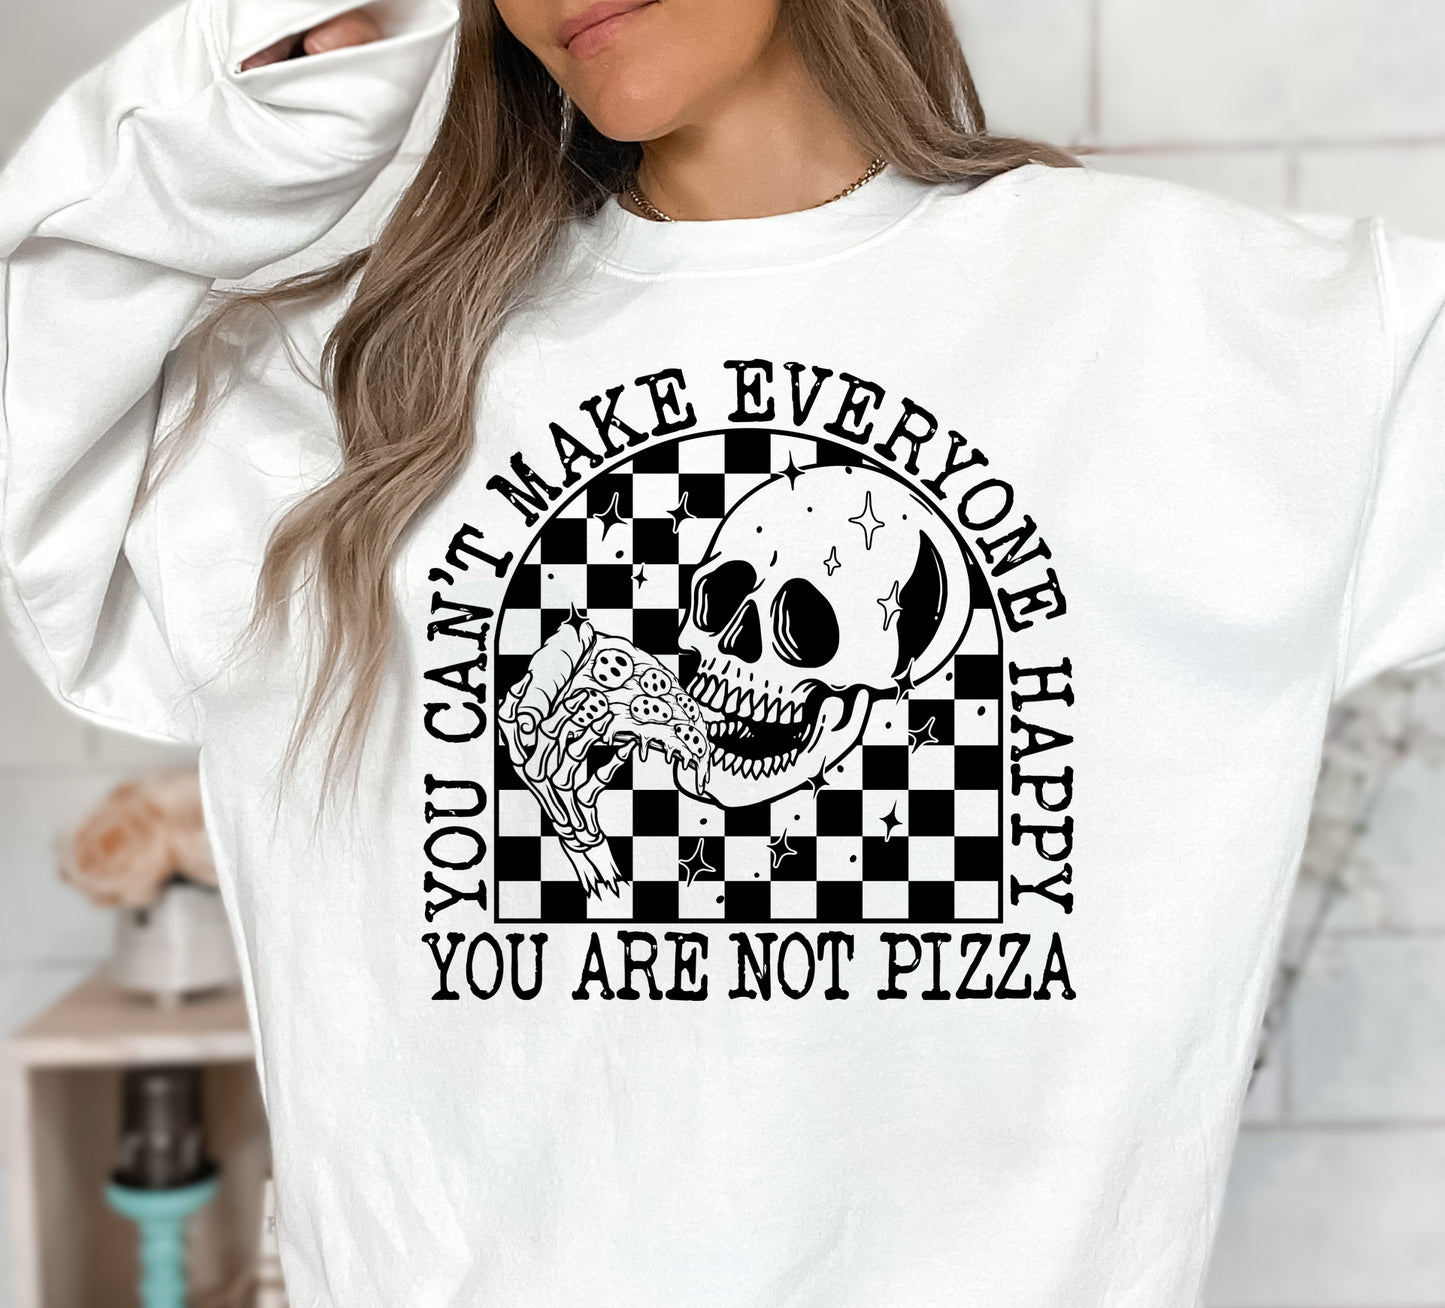 You aren't pizza